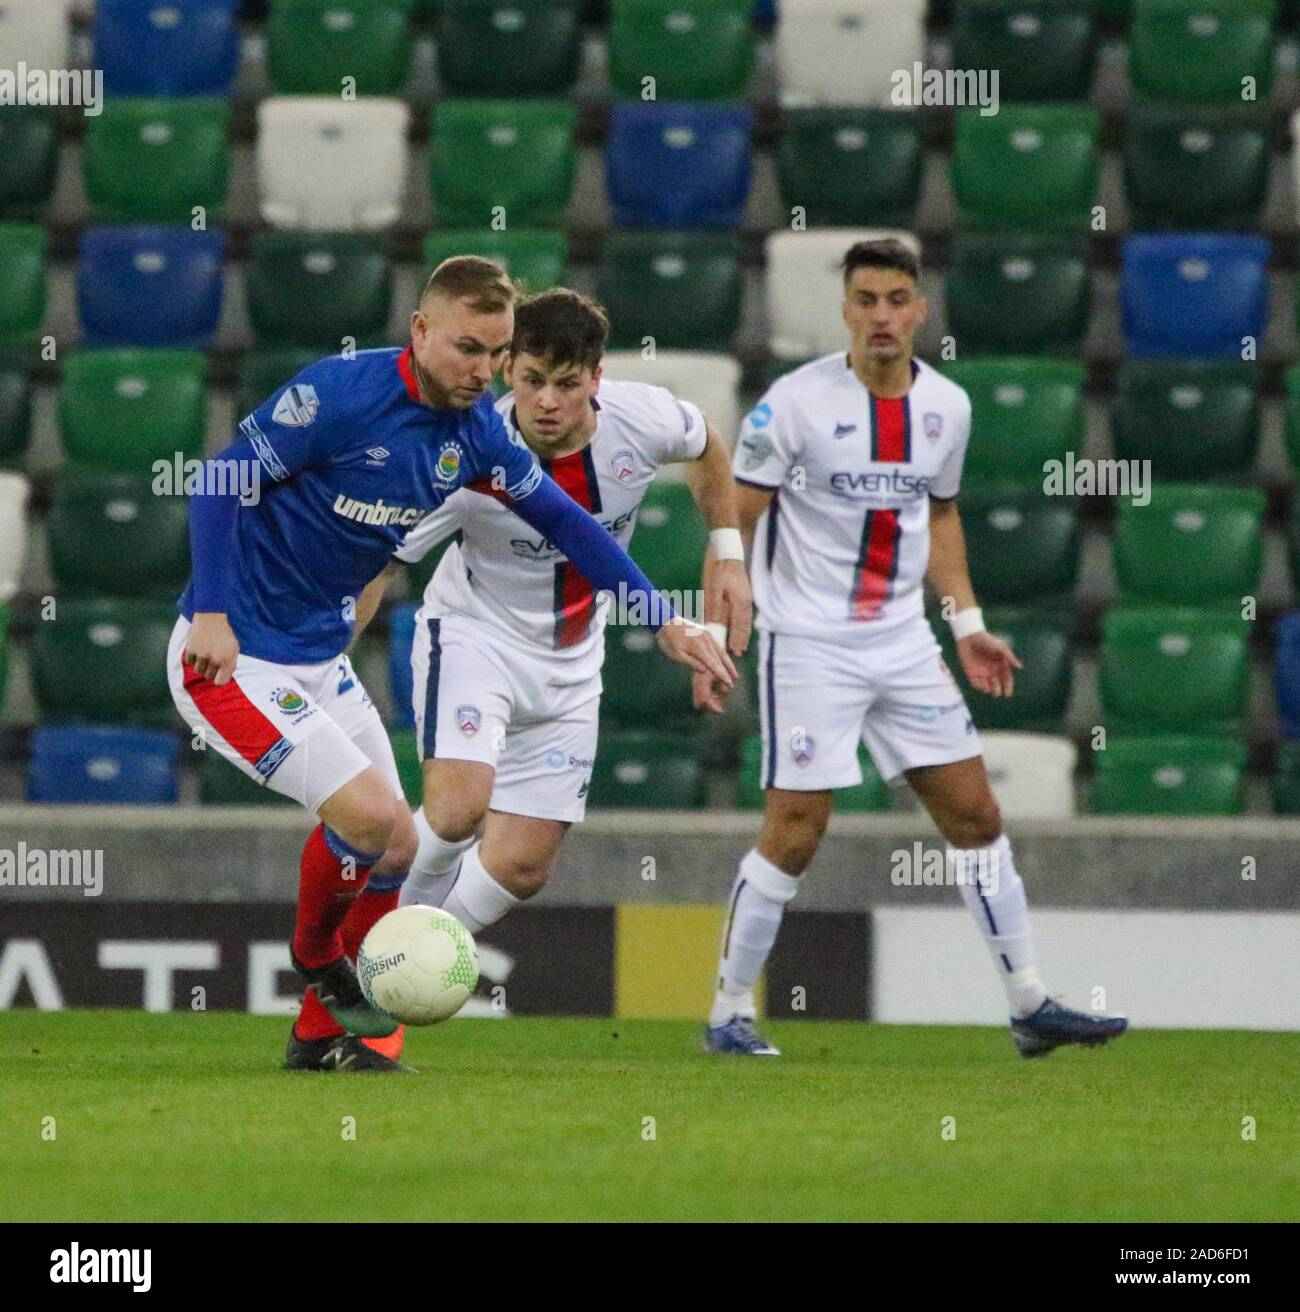 Windsor Park, Belfast, Northern Ireland. 03rd Dec 2019. BetMcLean League Cup - semi-final. Linfield (blue) v Coleraine.Action from tonight's game. Andy Mitchell (27) on the ball for Linfield. Credit: CAZIMB/Alamy Live News. Stock Photo